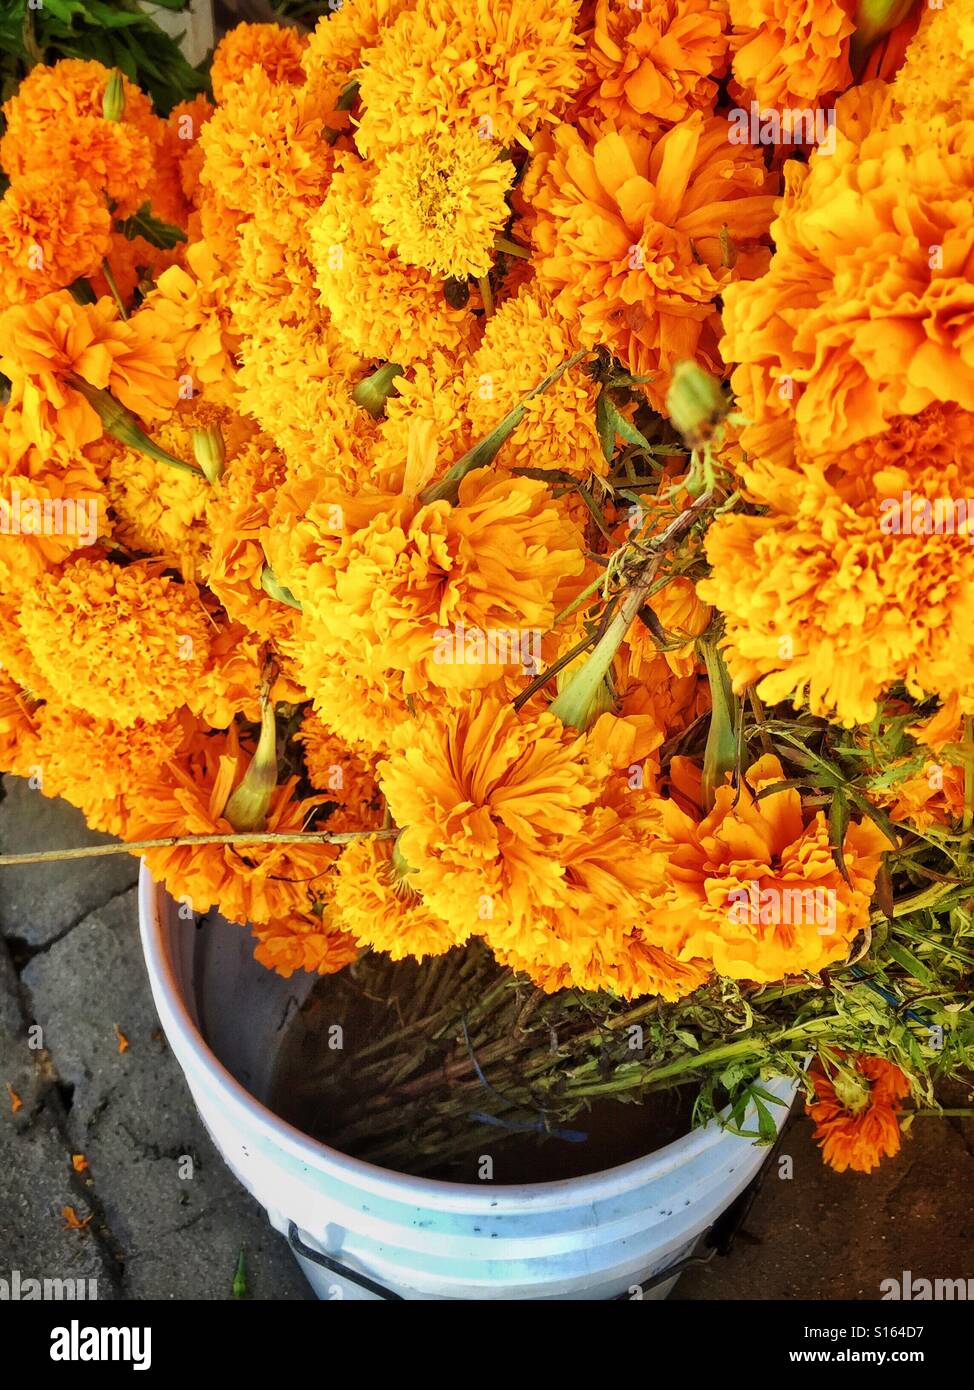 A bucket of long stemmed marigolds for sale sits on the sidewalk in a pueblo in Mexico on Dia de Los Muertos. Stock Photo